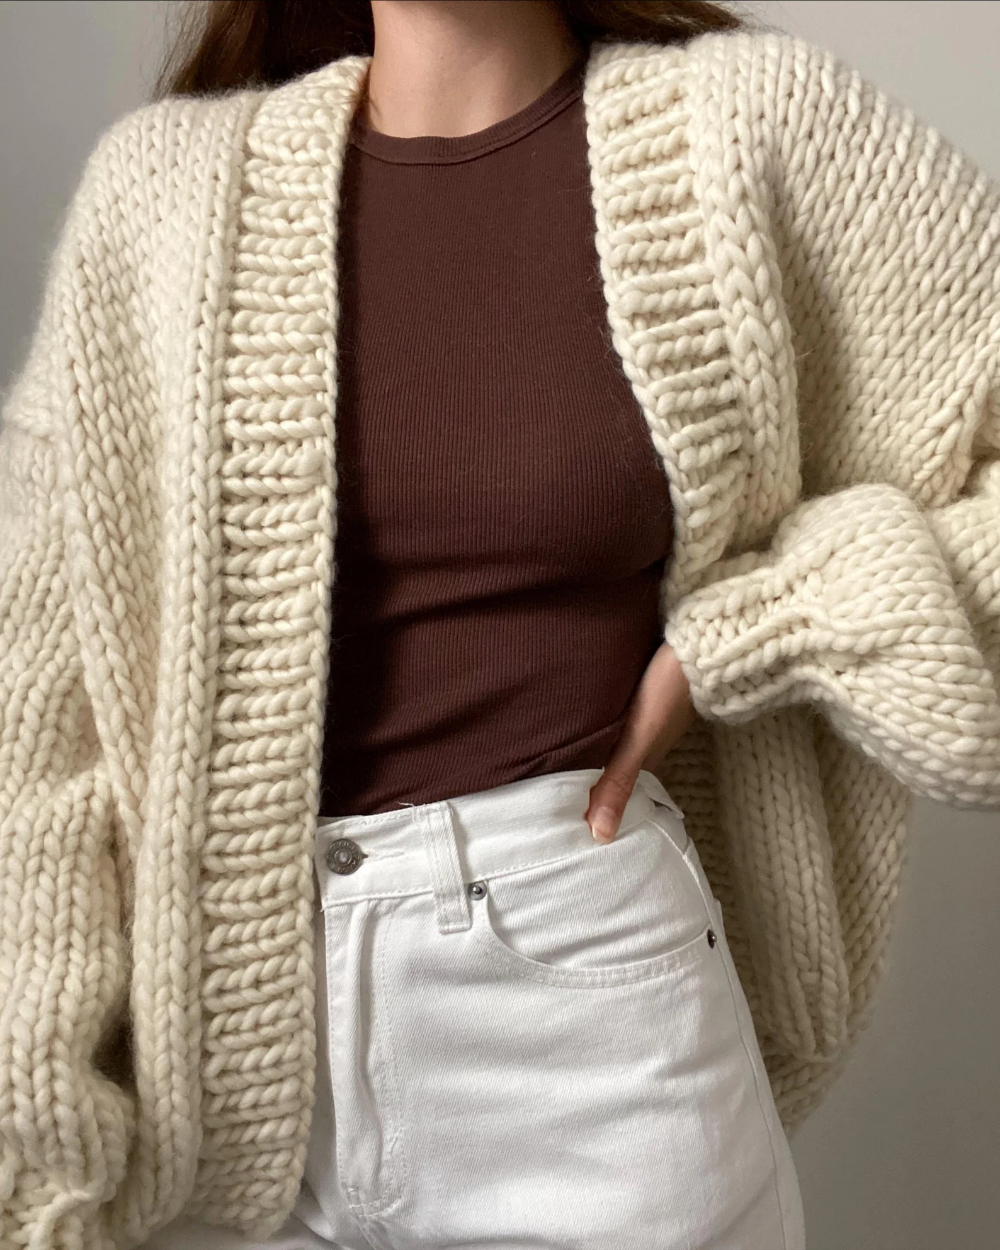 How to Wear Knit Jacket: Top 13 Cozy & Attractive Outfit Ideas for Women